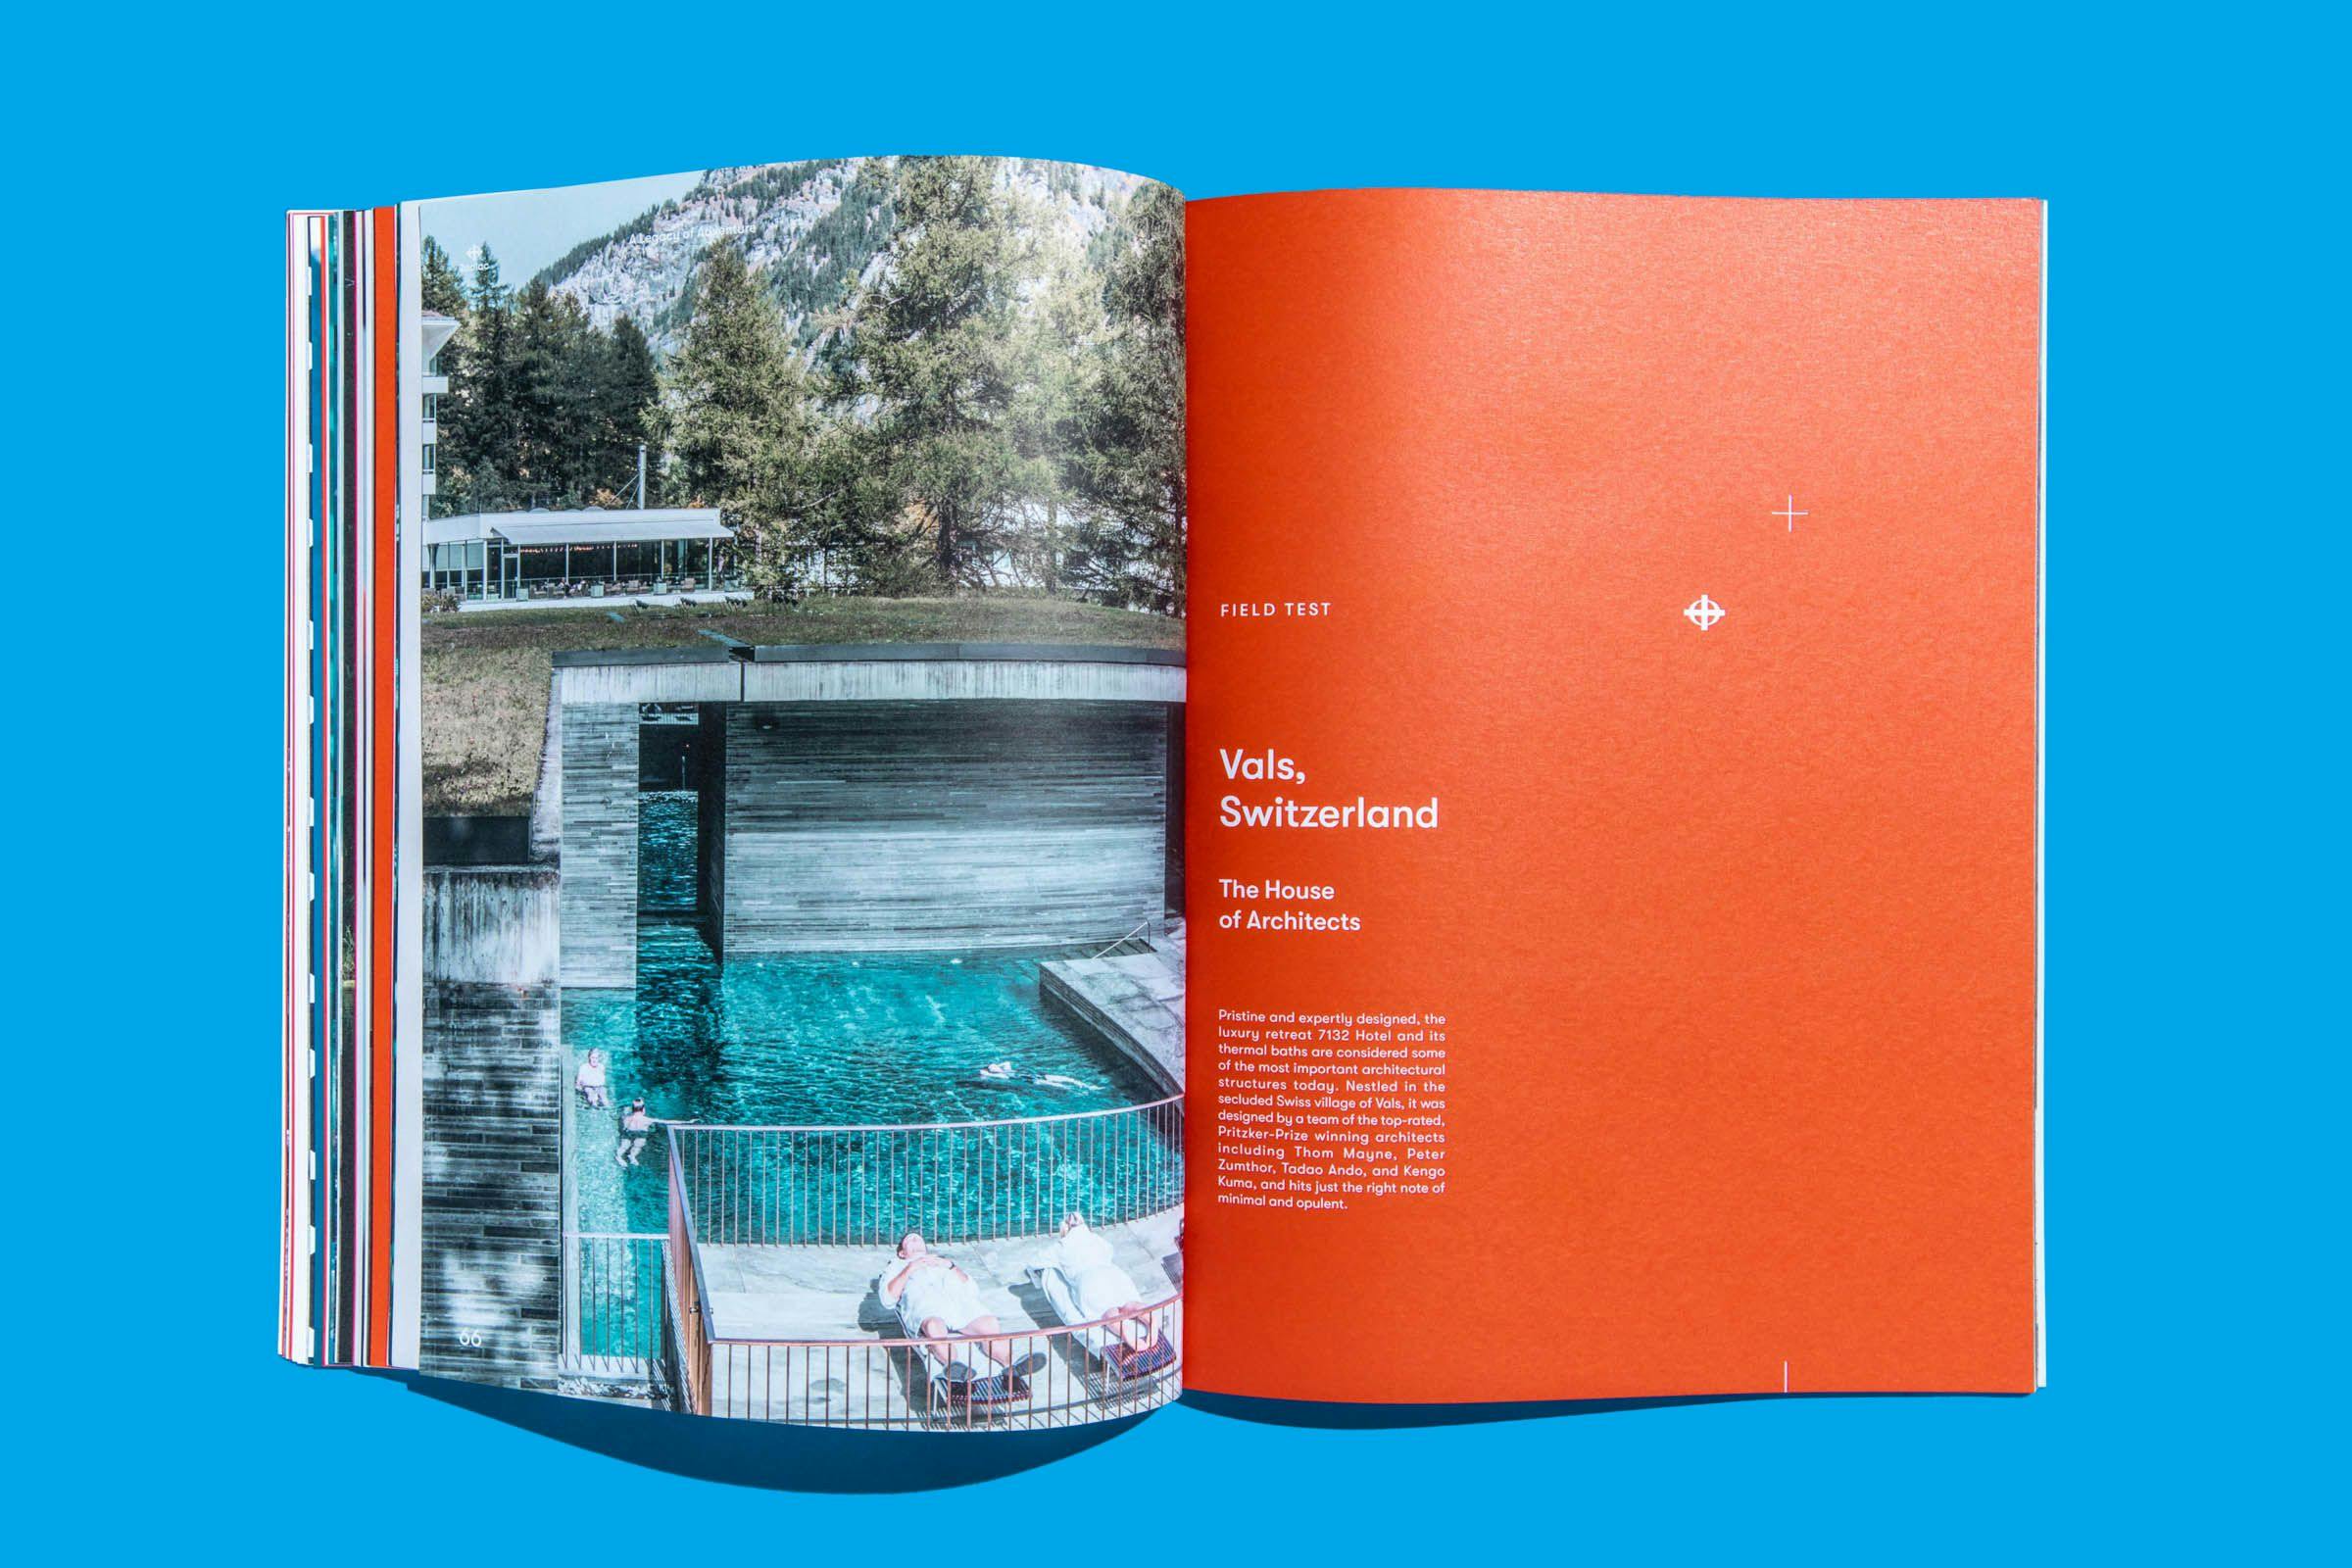 Pages from Zodiac Watches: Brand Book showing a photo of people relaxing by the pool